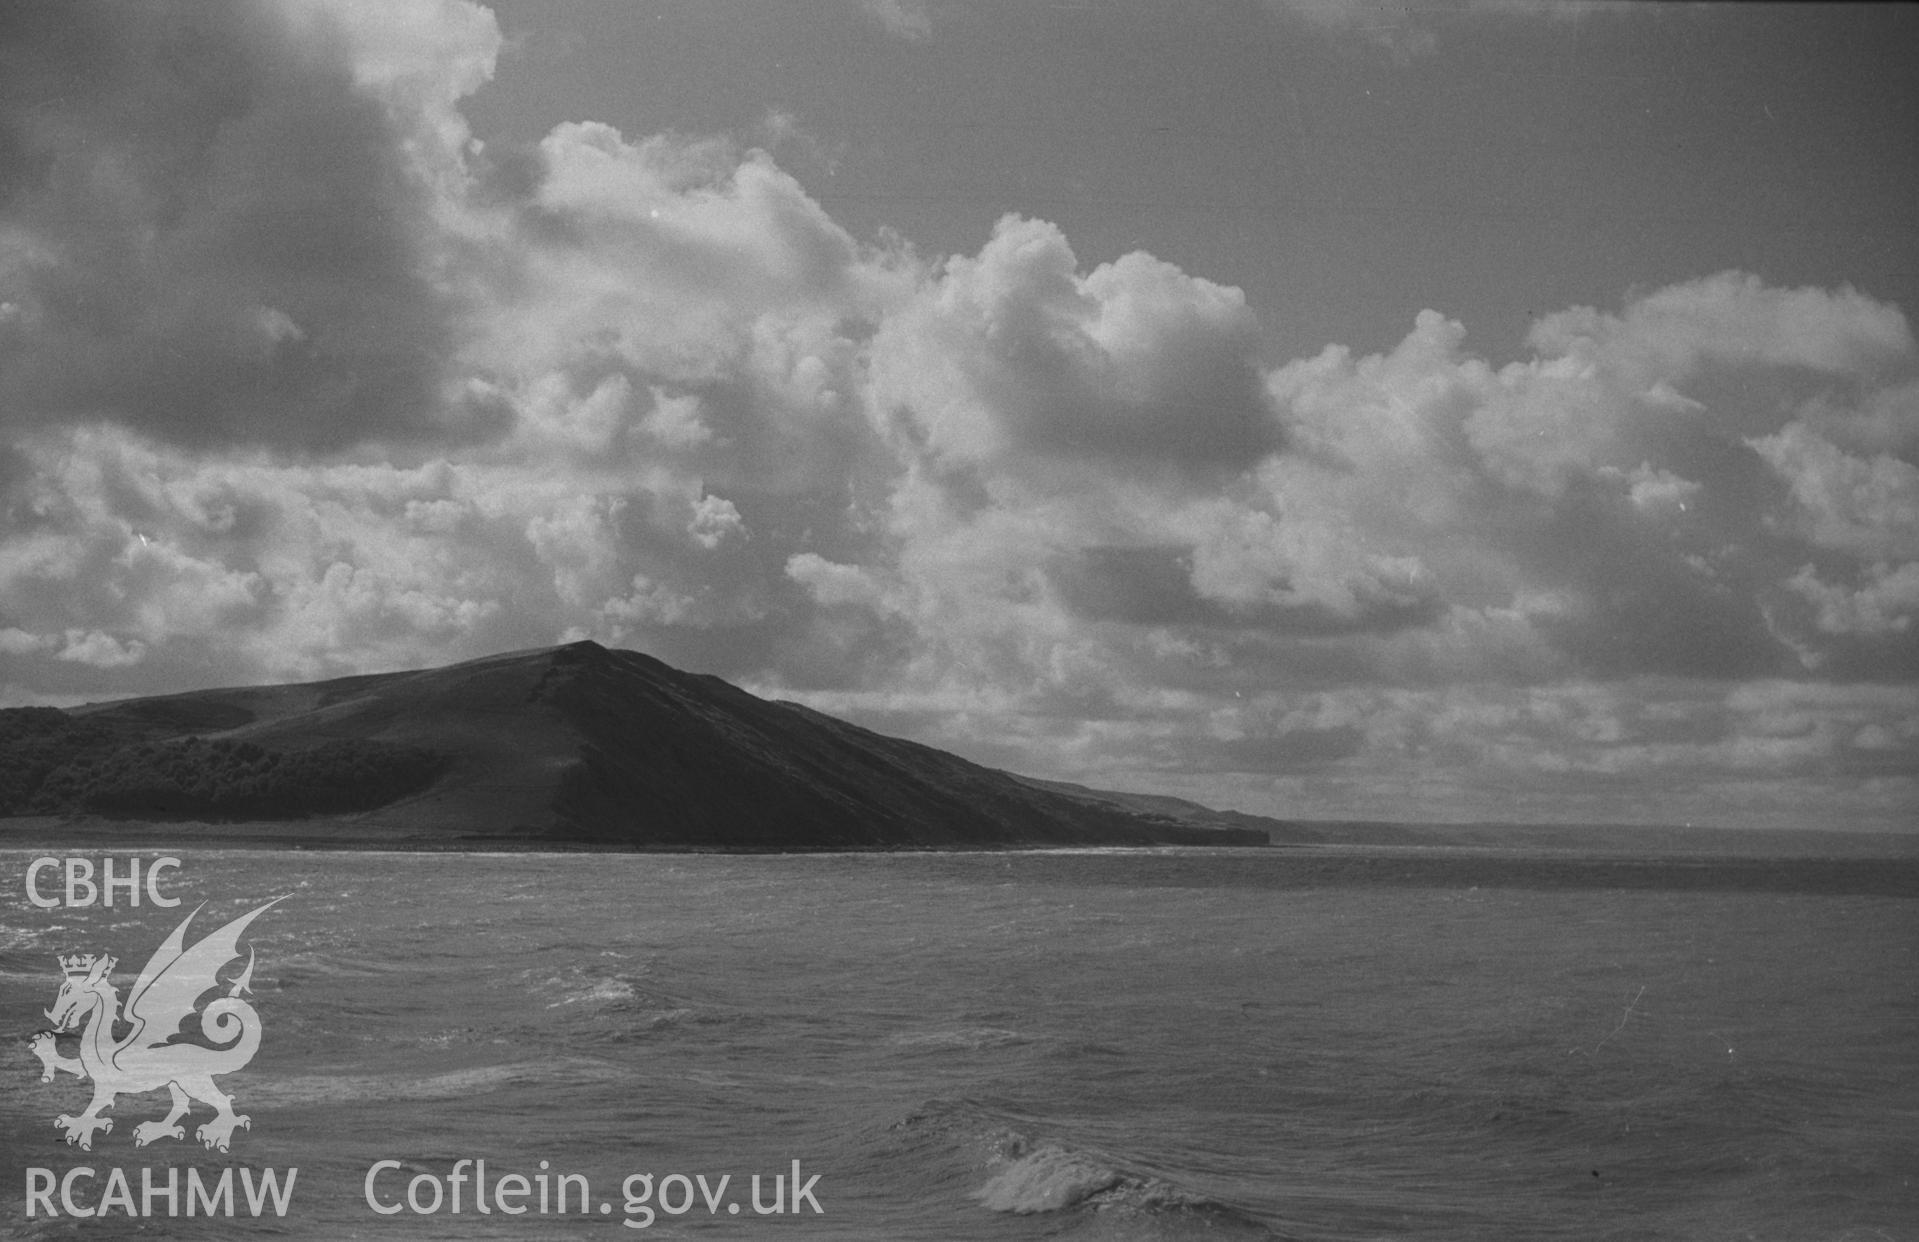 Digital copy of a black and white negative showing view of Alltwen hill from Tanybwlch beach, Aberystwyth. Photographed by Arthur O. Chater in September 1964 from Tanybwlch pier. Grid Reference SN 5785 8078. (Panorama. Photograph 9 of 10).